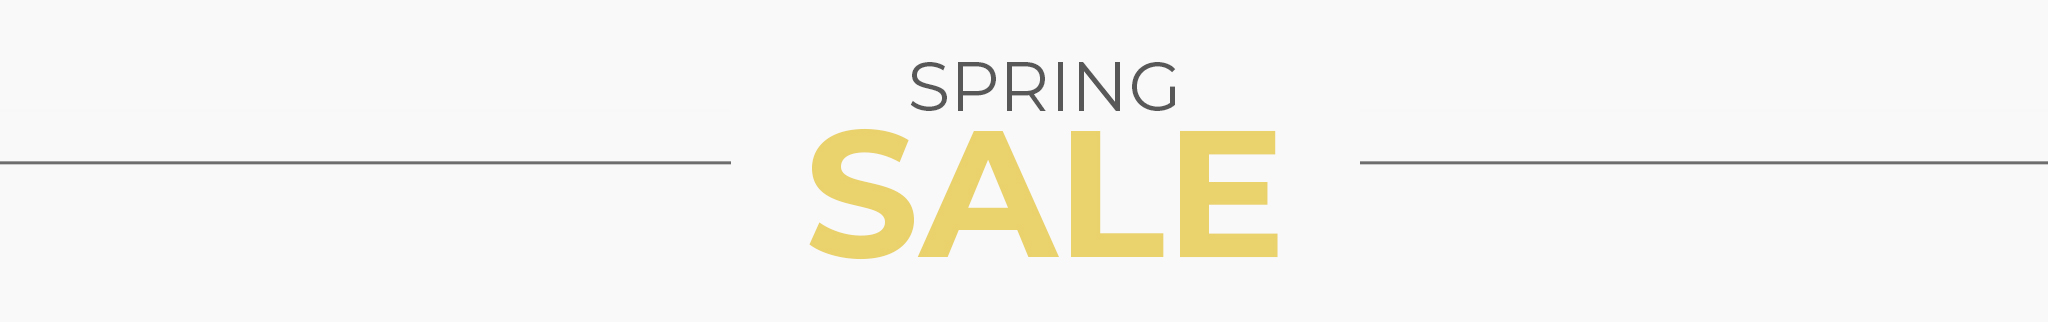 spring sale page banner